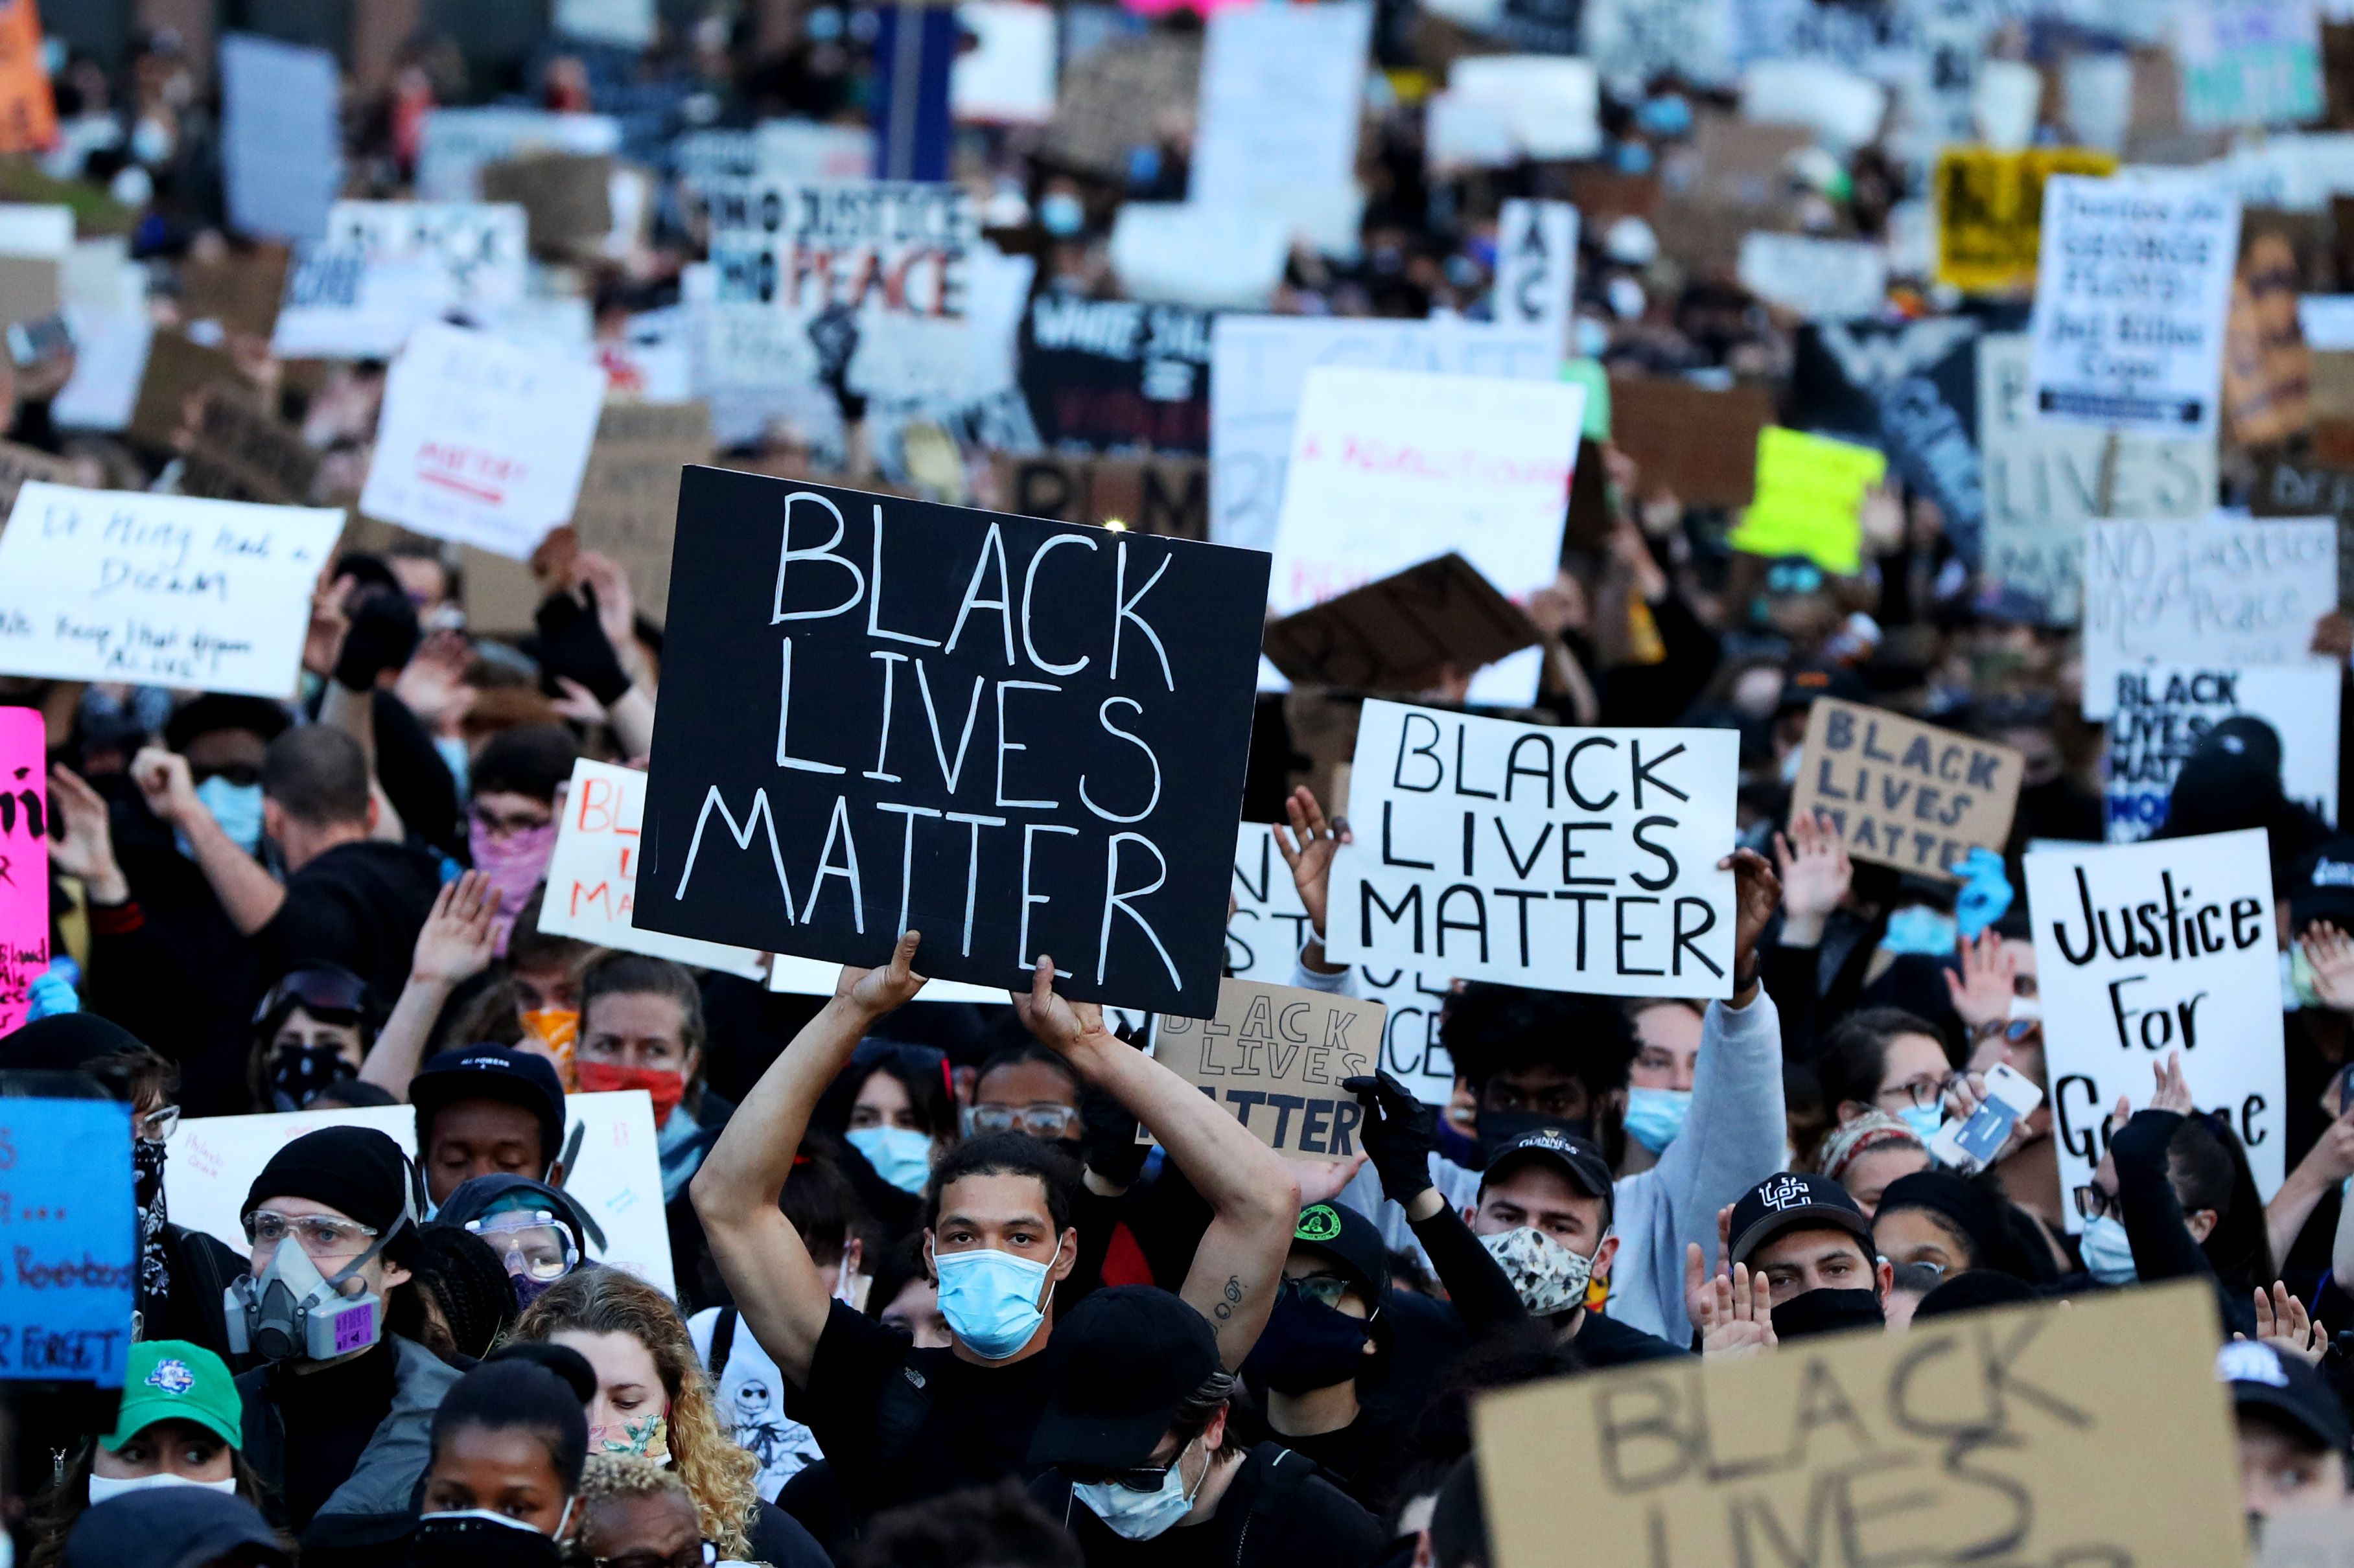 Demonstrators protest in response to the death of George Floyd on May 31, 2020 in Boston, Massachusetts | Photo: Maddie Meyer/Getty Images